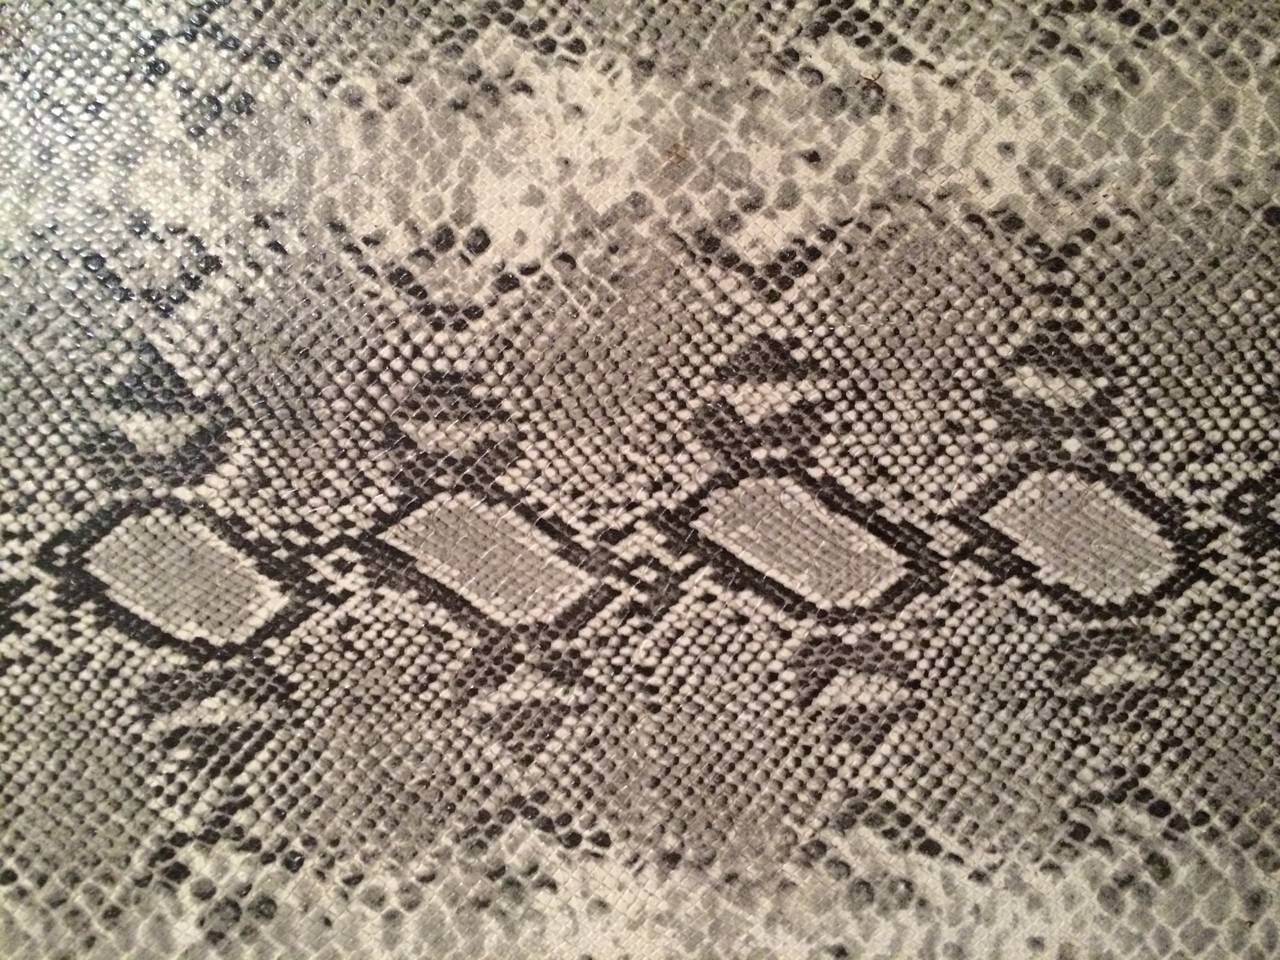 David Hicks solid wood Parsons table wrapped in python print, circa 1970.